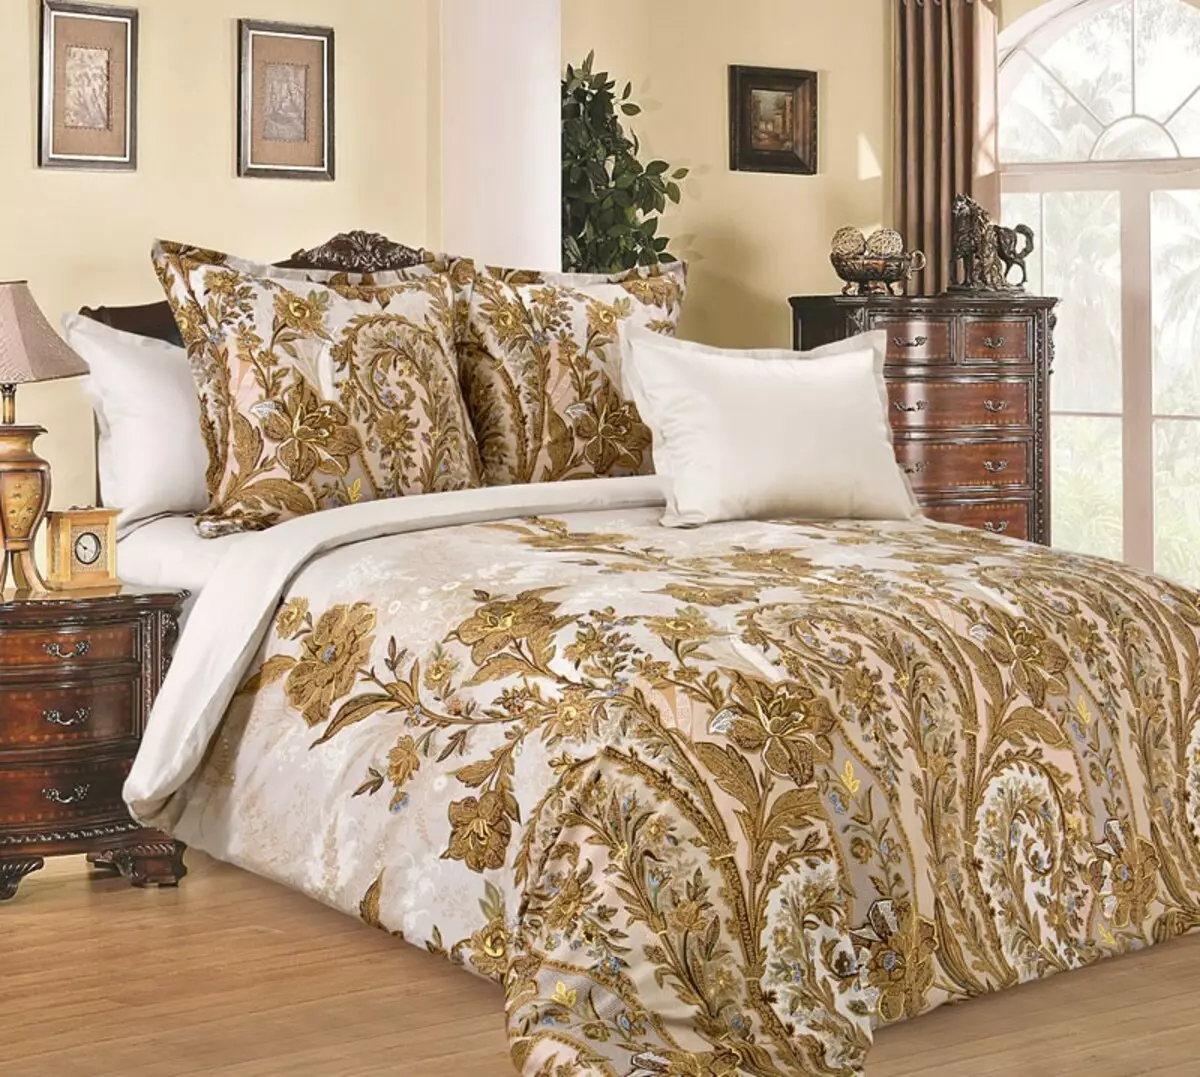 Bed linen O'Lelen: Overview of the range and features of bed linen, customer reviews 21261_13